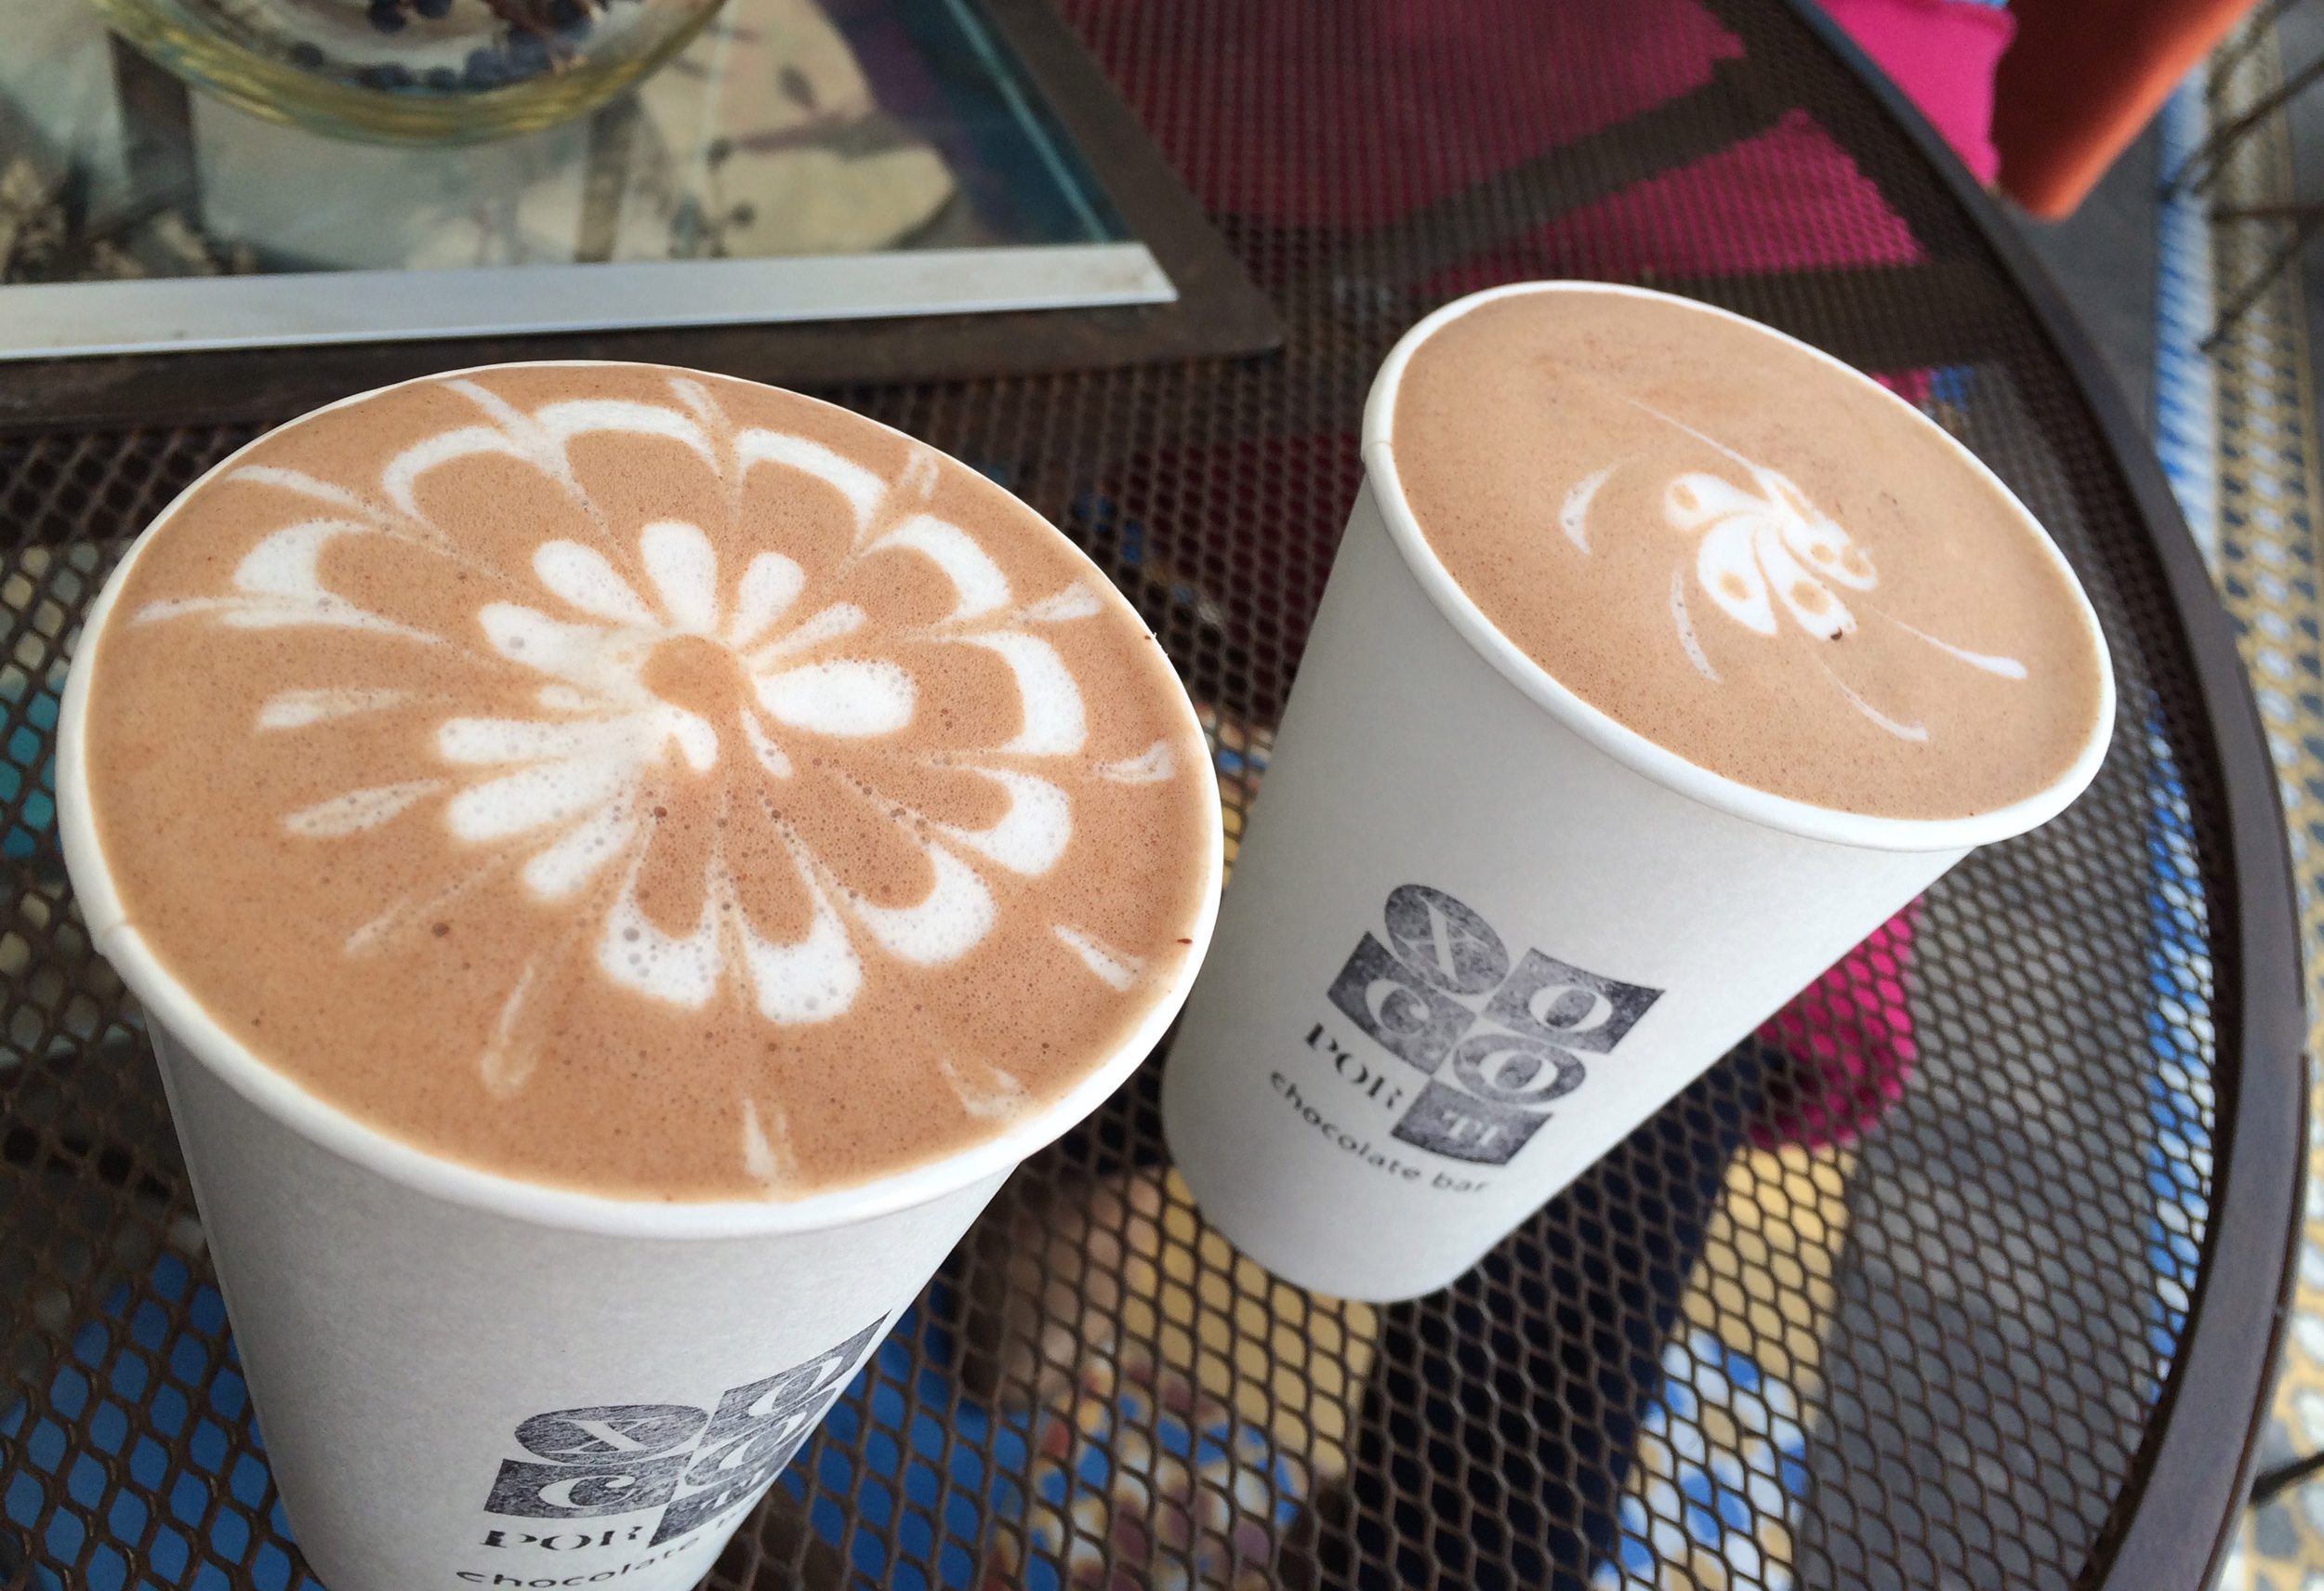 Our favorite hot chocolate in town.